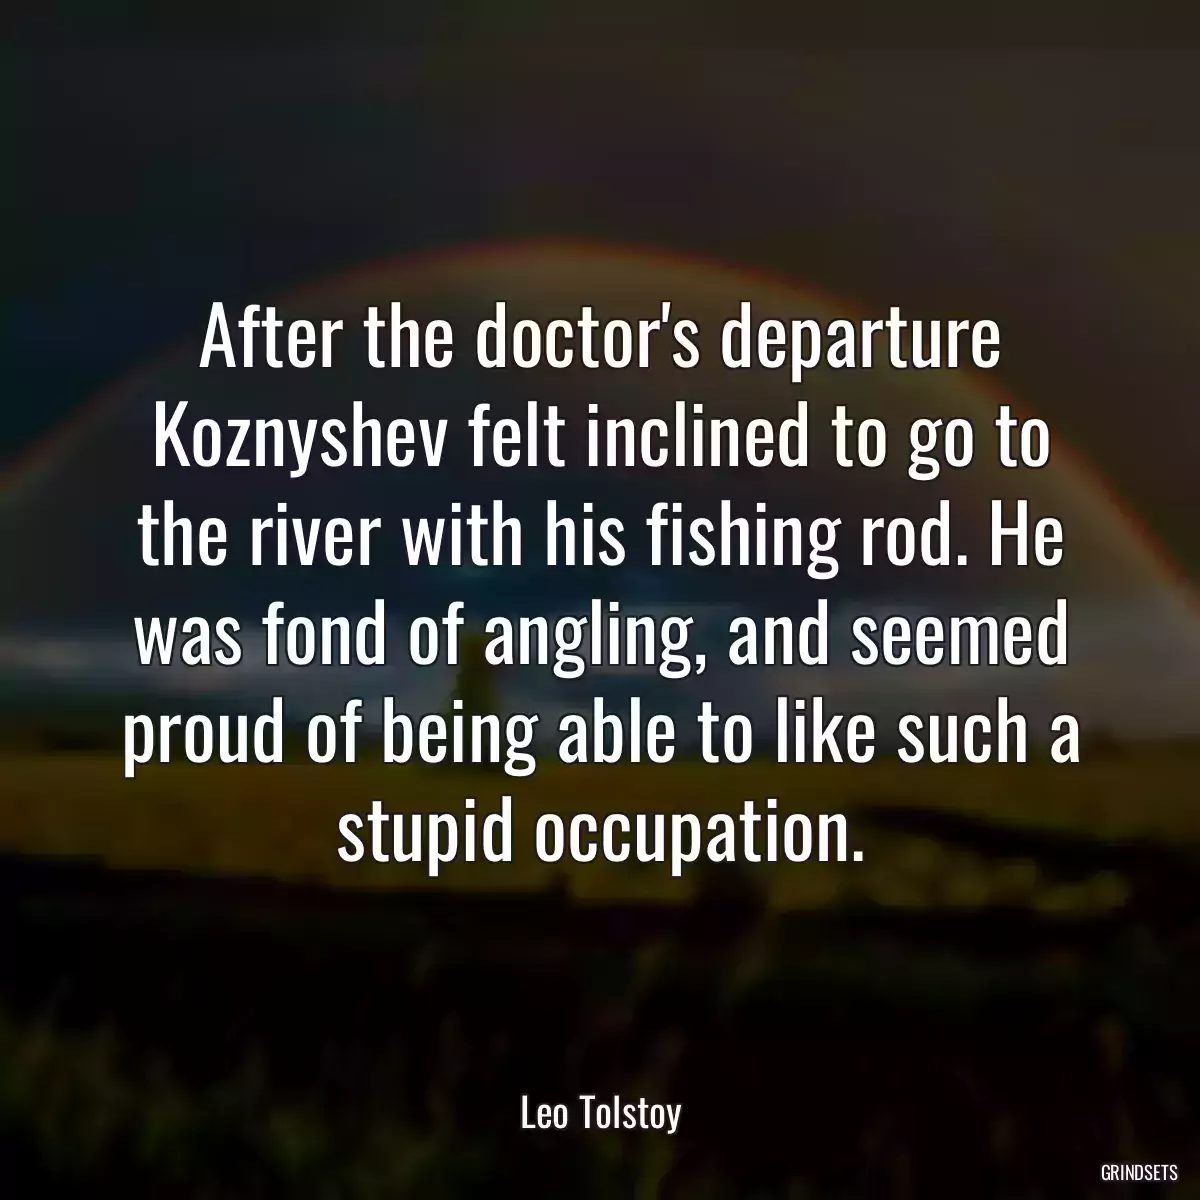 After the doctor\'s departure Koznyshev felt inclined to go to the river with his fishing rod. He was fond of angling, and seemed proud of being able to like such a stupid occupation.